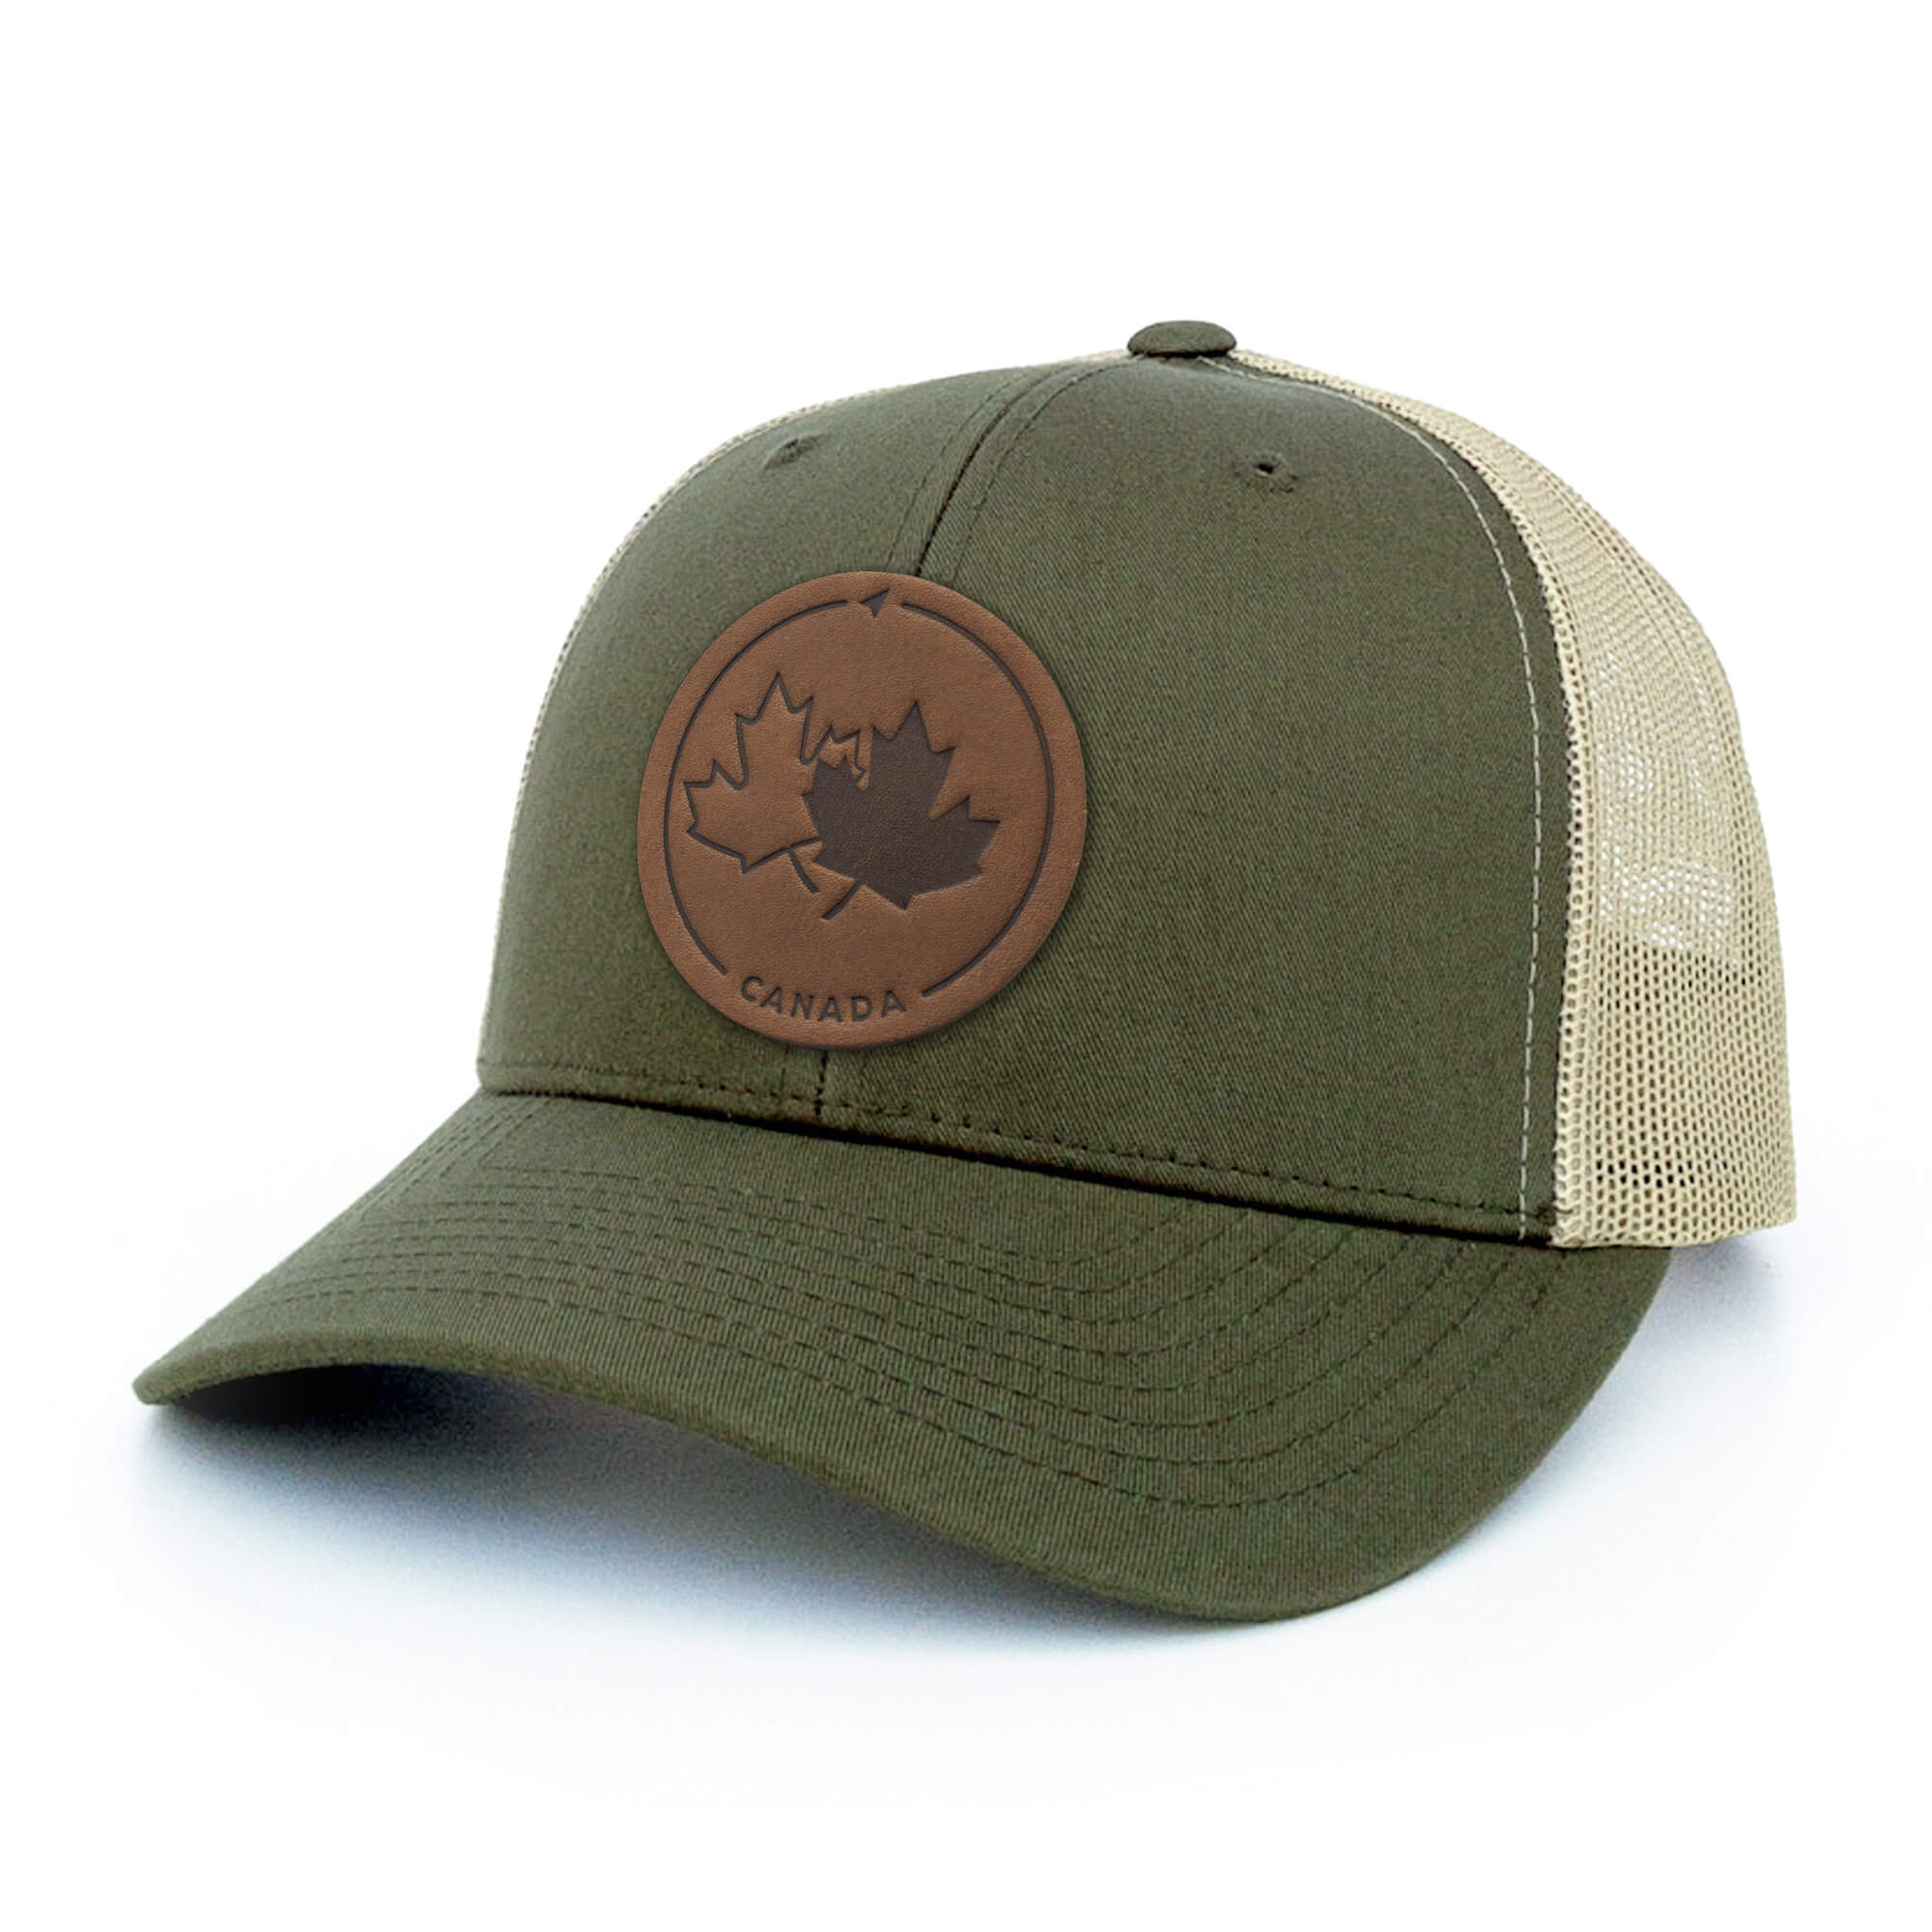 Moss Green and khaki trucker hat with full-grain leather patch of Canada Strong and Free | BLACK-002-010, CHARC-002-010, NAVY-002-010, HGREY-002-010, MOSS-002-010, BROWN-002-010, RED-002-010